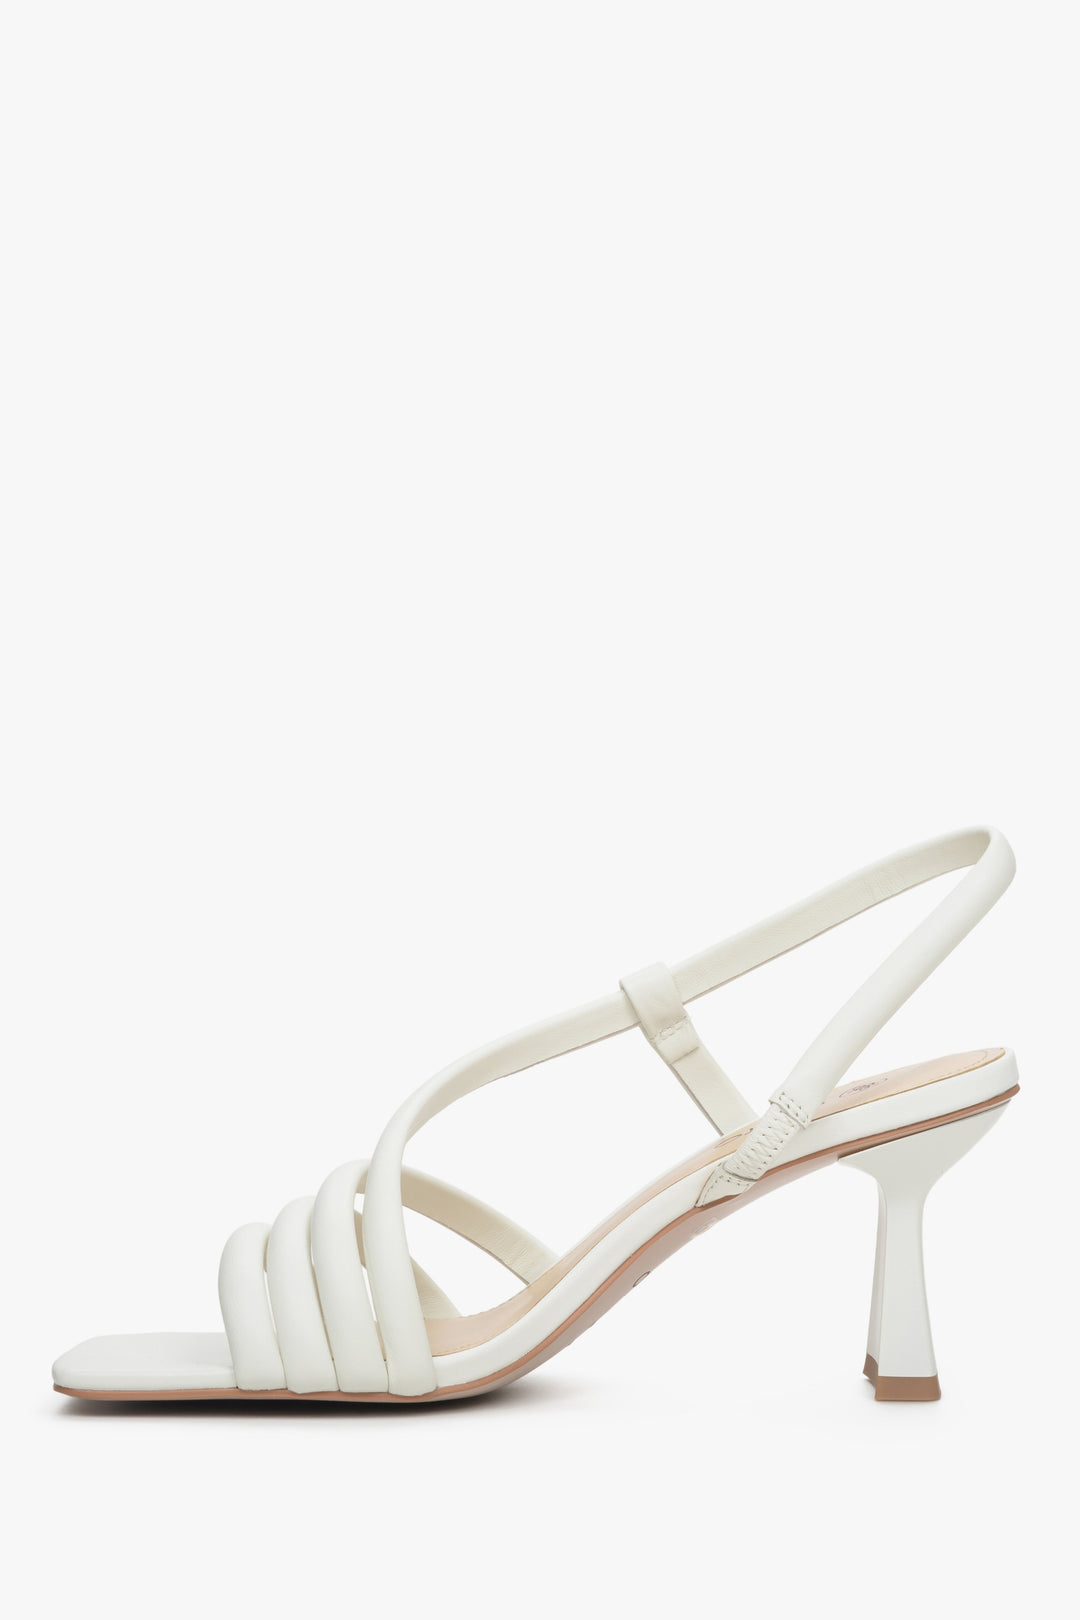 Natural leather Estro strappy sandals in light beige.